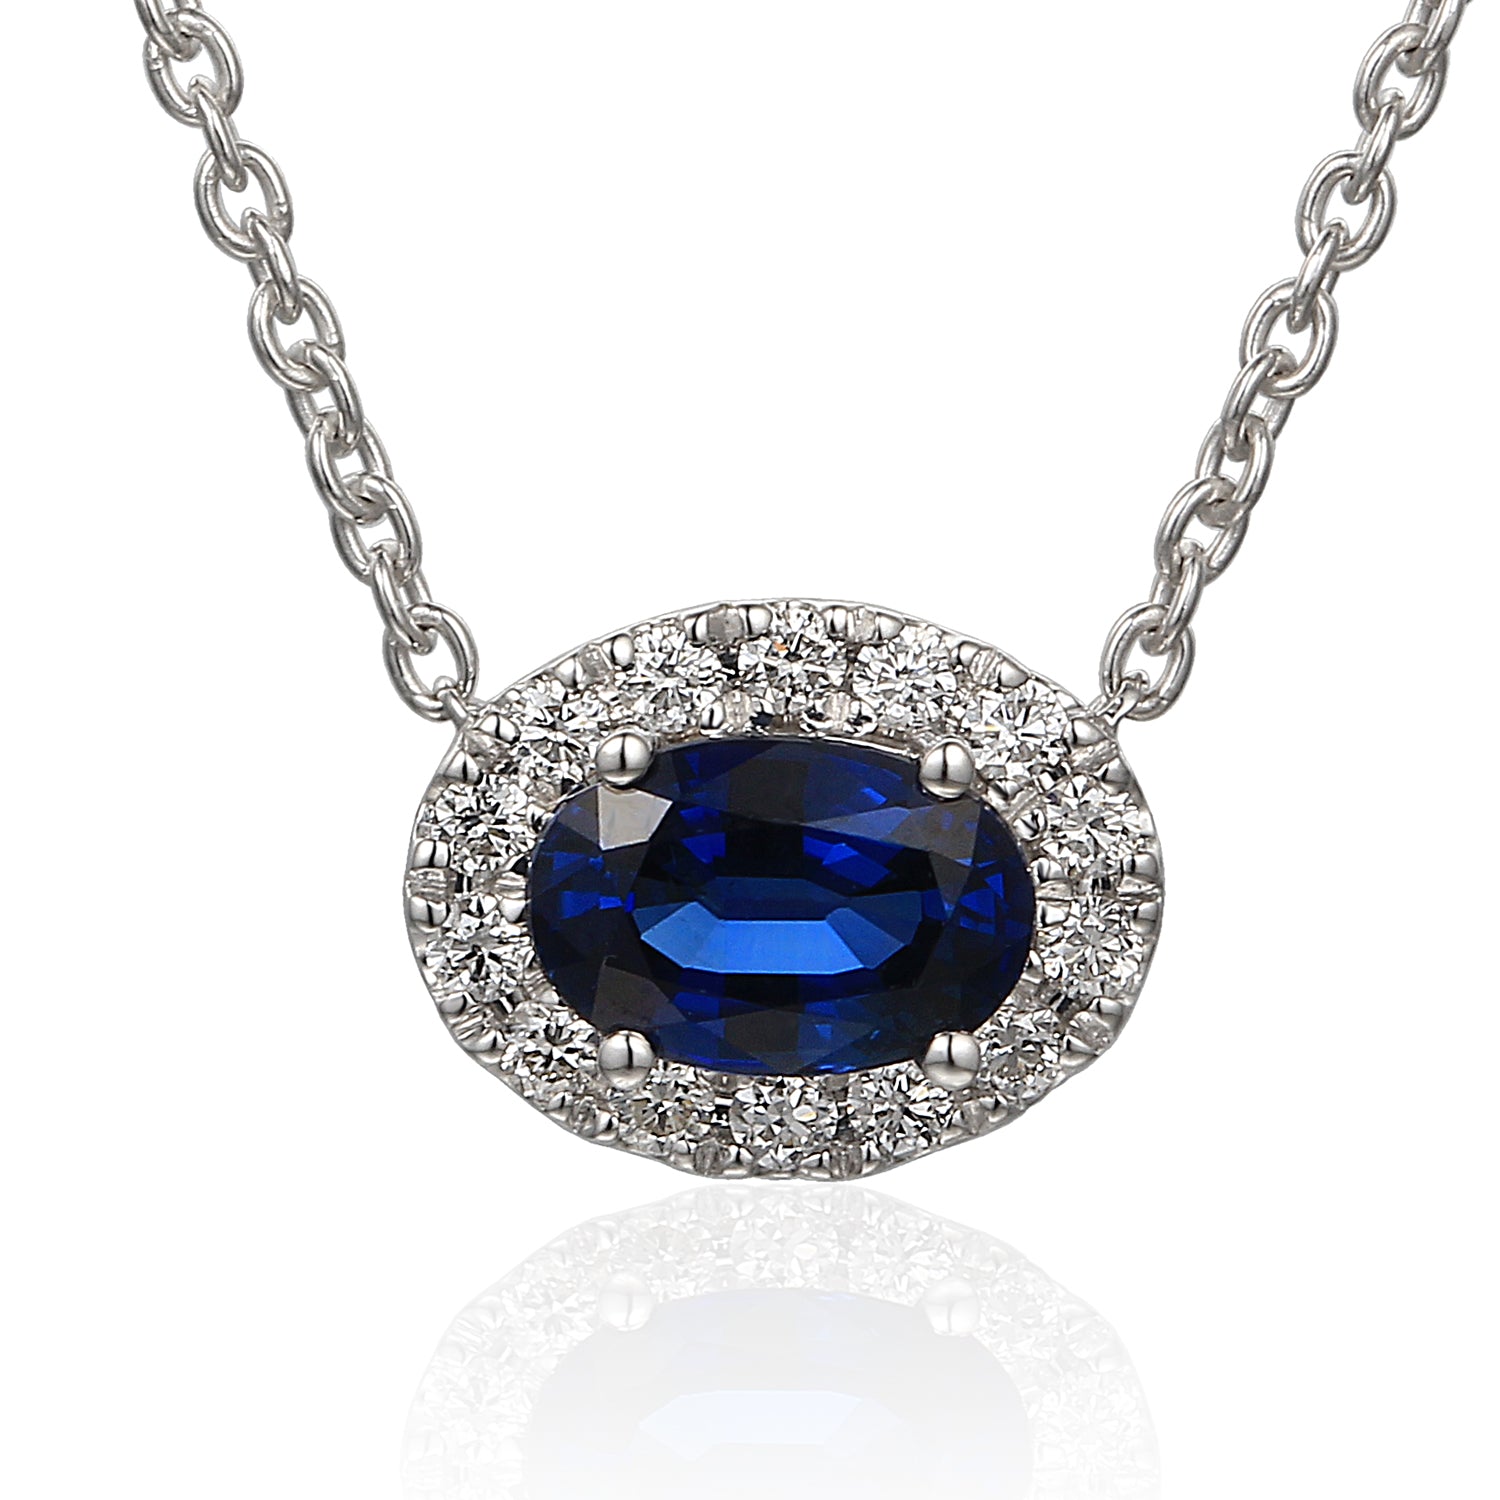 18ct White Gold Oval Sapphire and Diamond Pendant on Chain